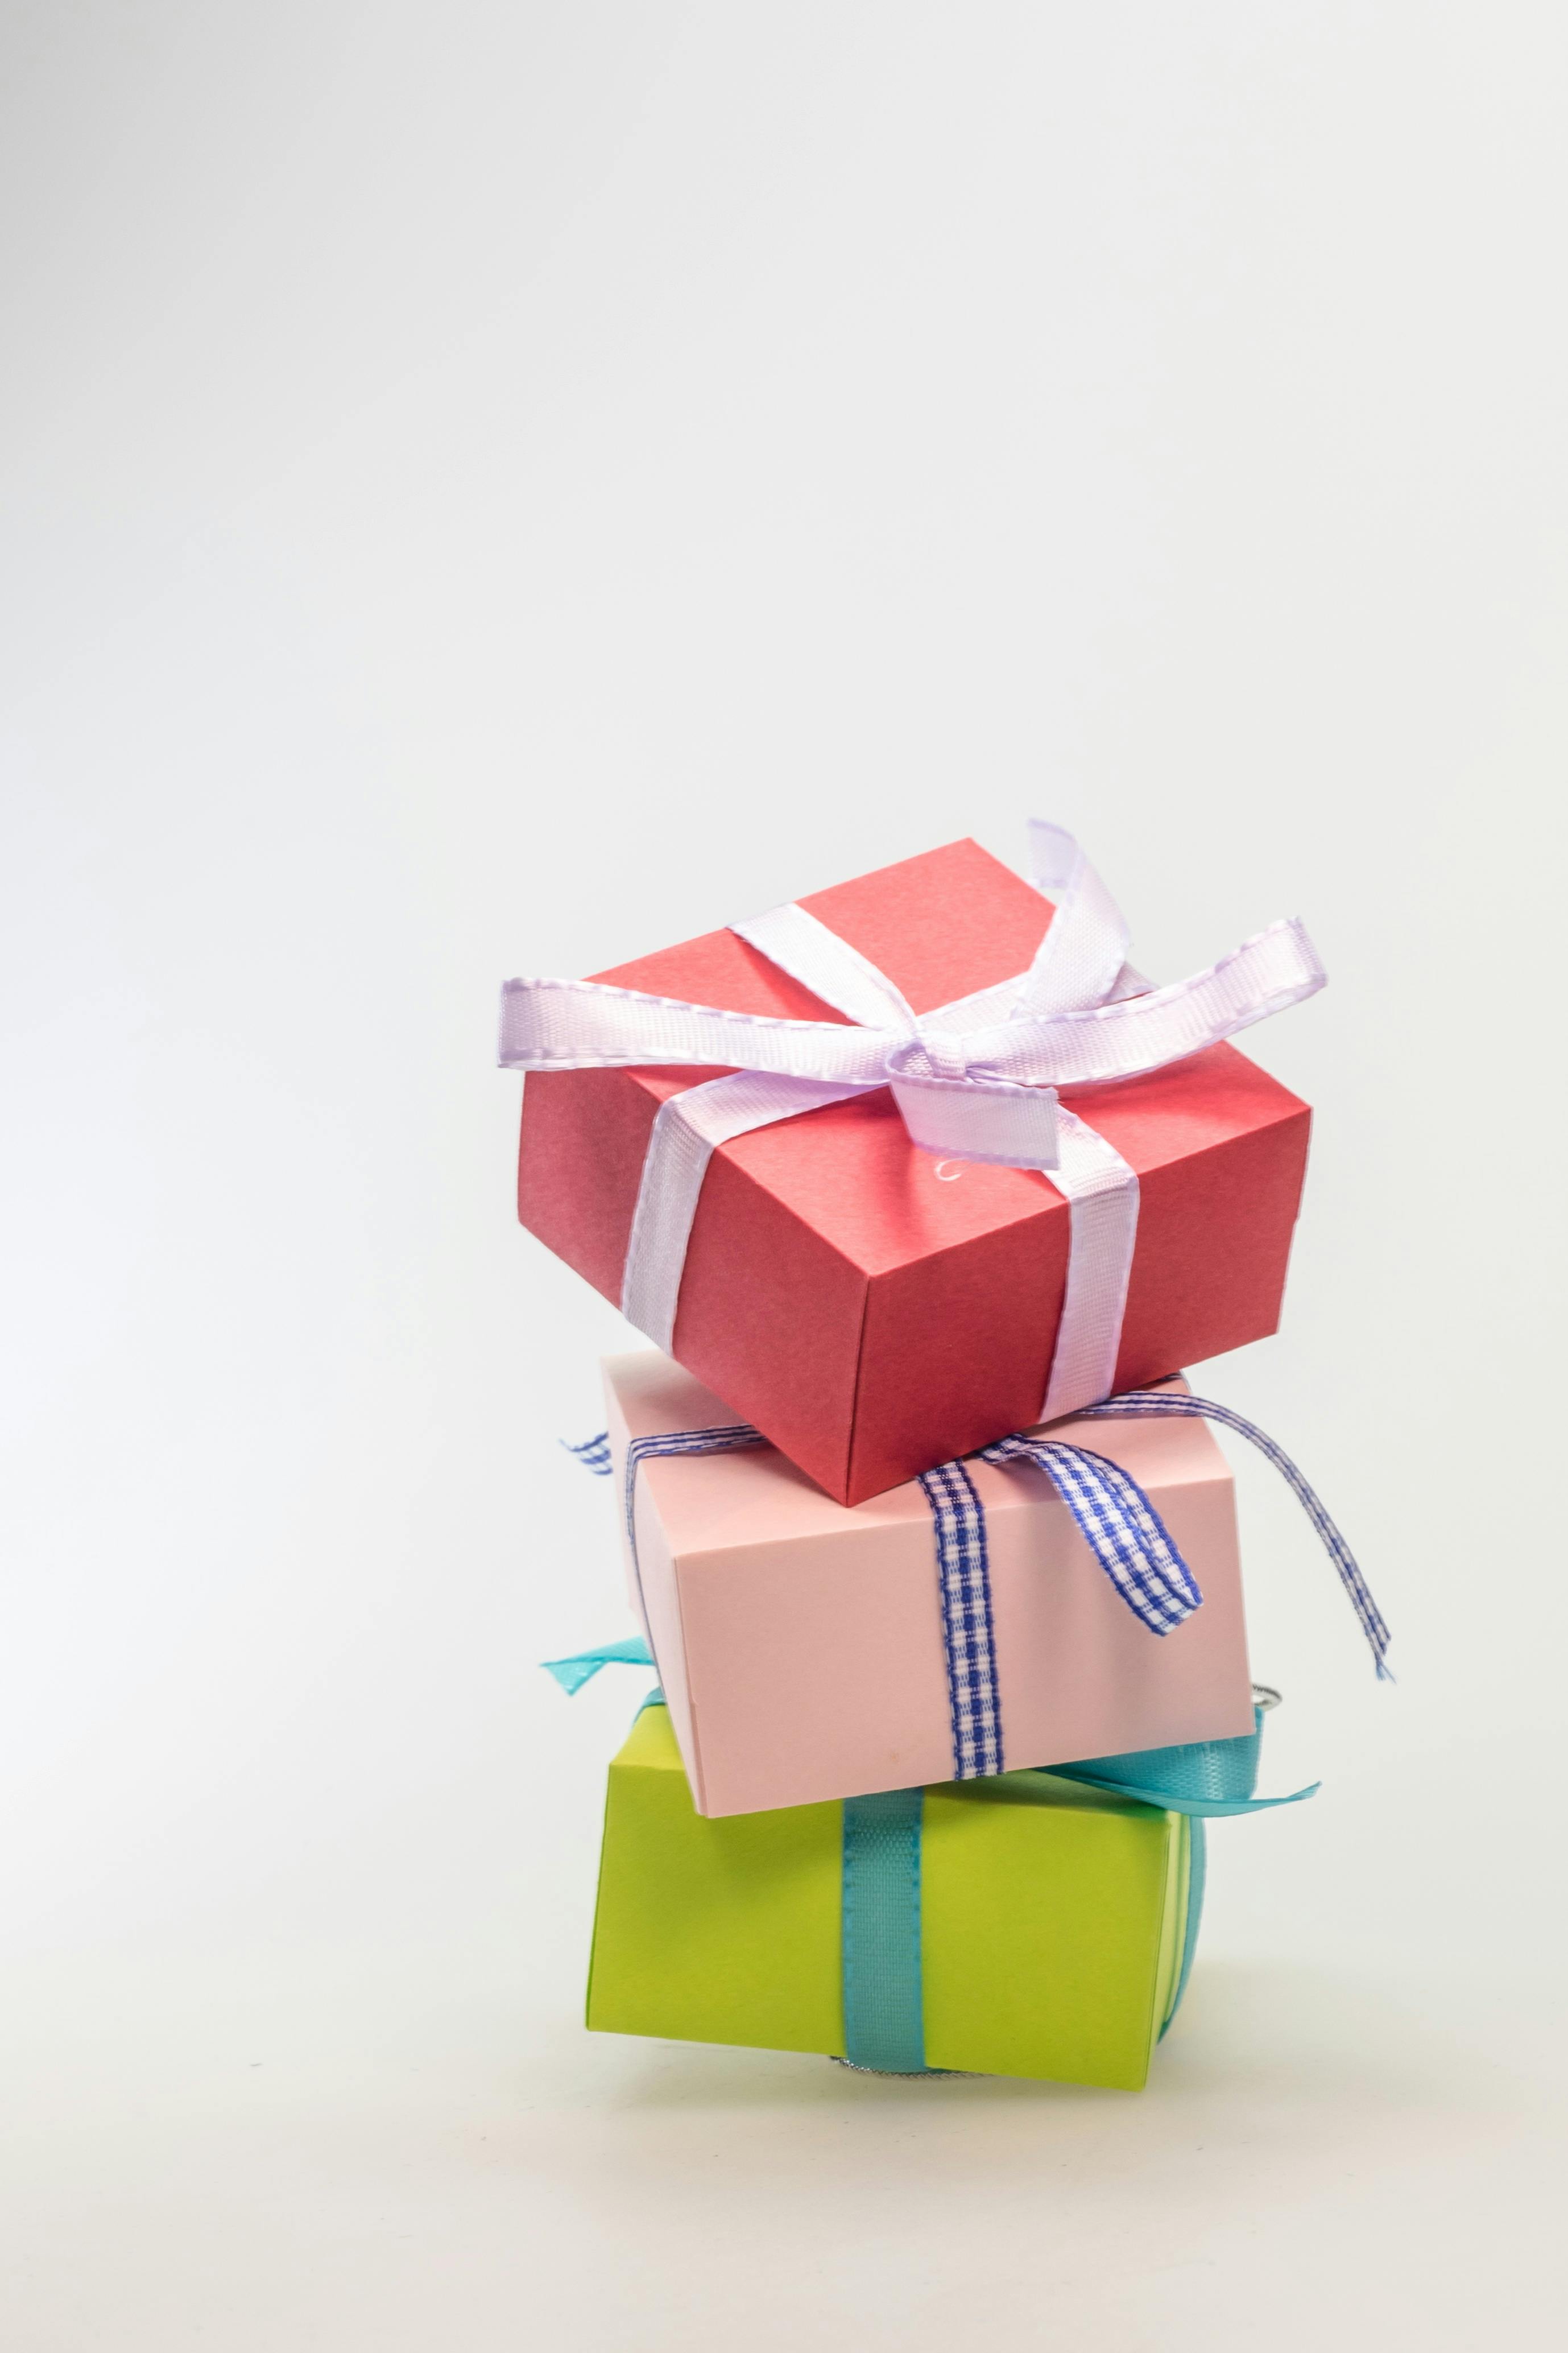 Christmas Gifts Pictures | Download Free Images on Unsplash